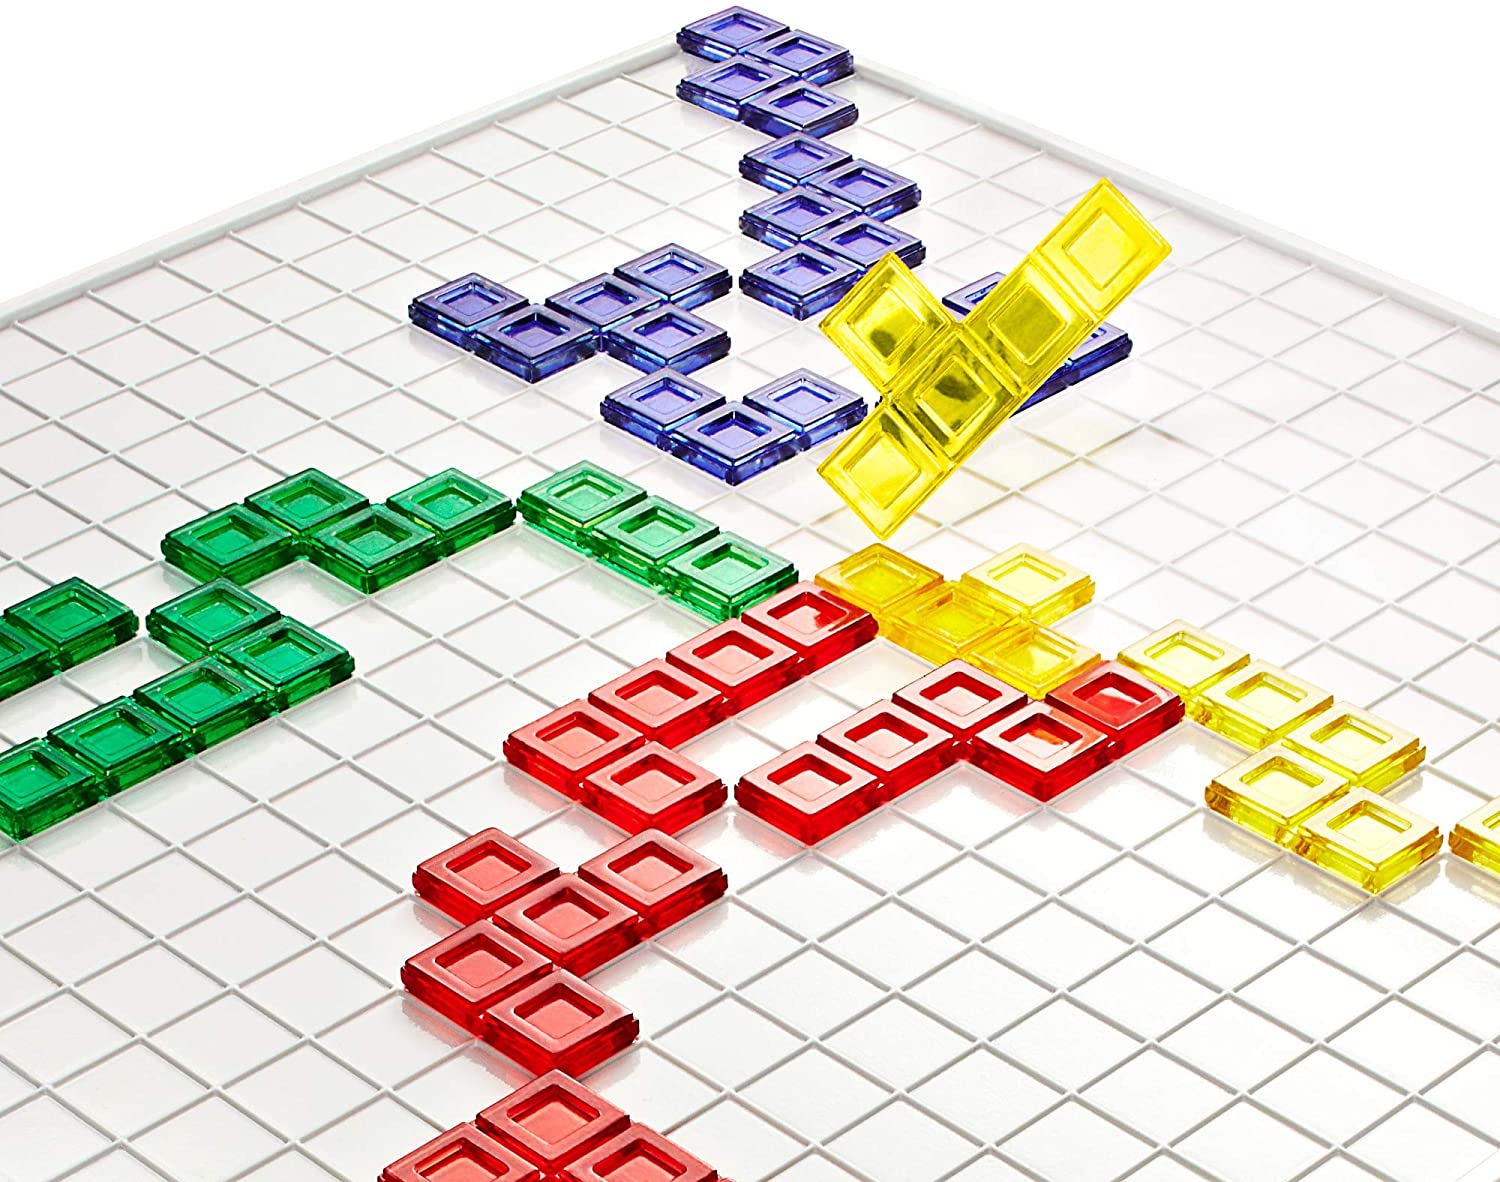 Where to buy Blokus